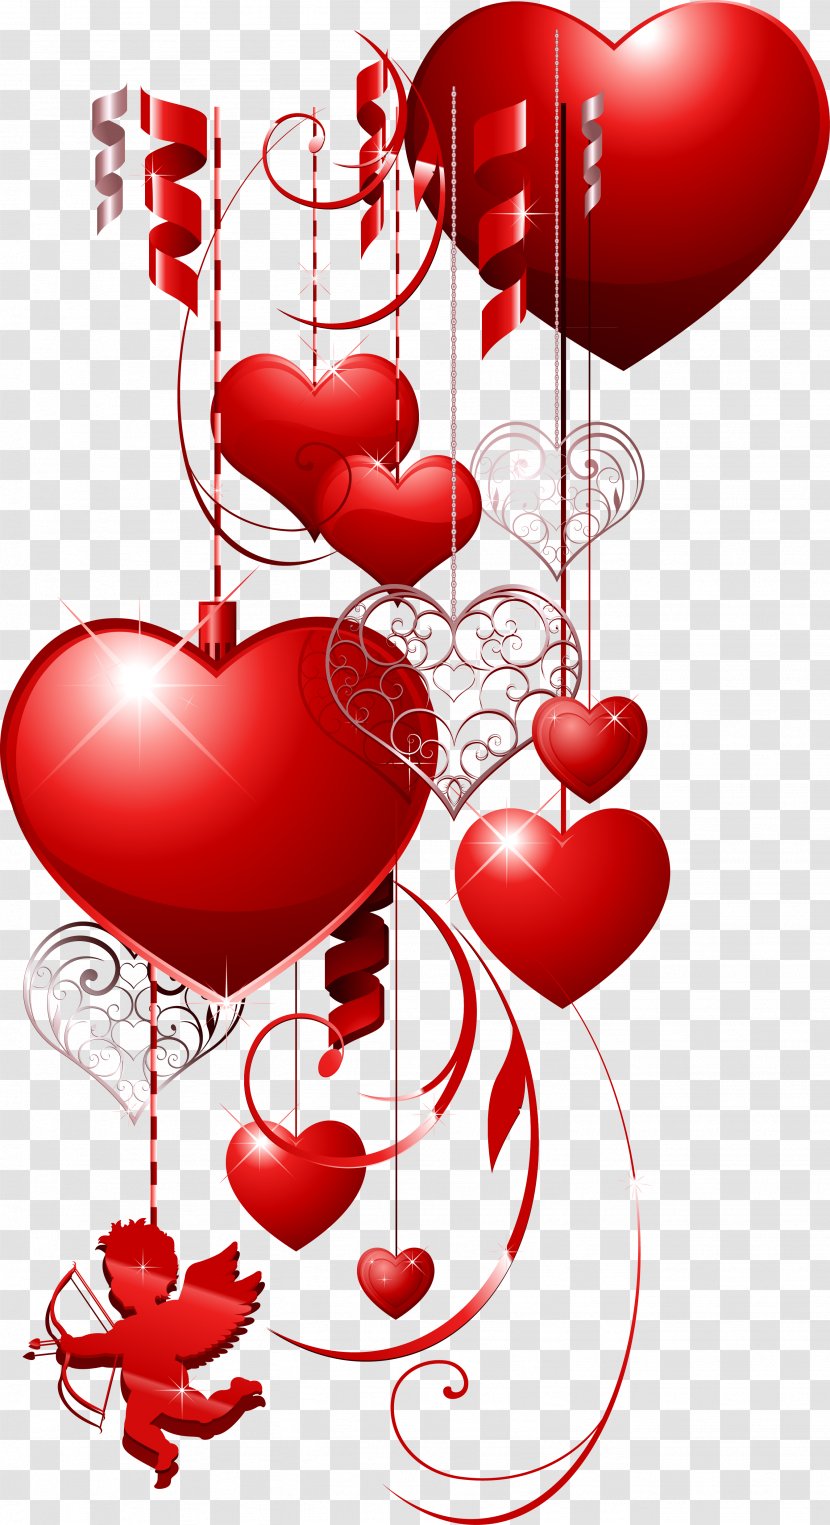 Valentine's Day February 14 Heart Clip Art - Flower - Romantic Transparent PNG